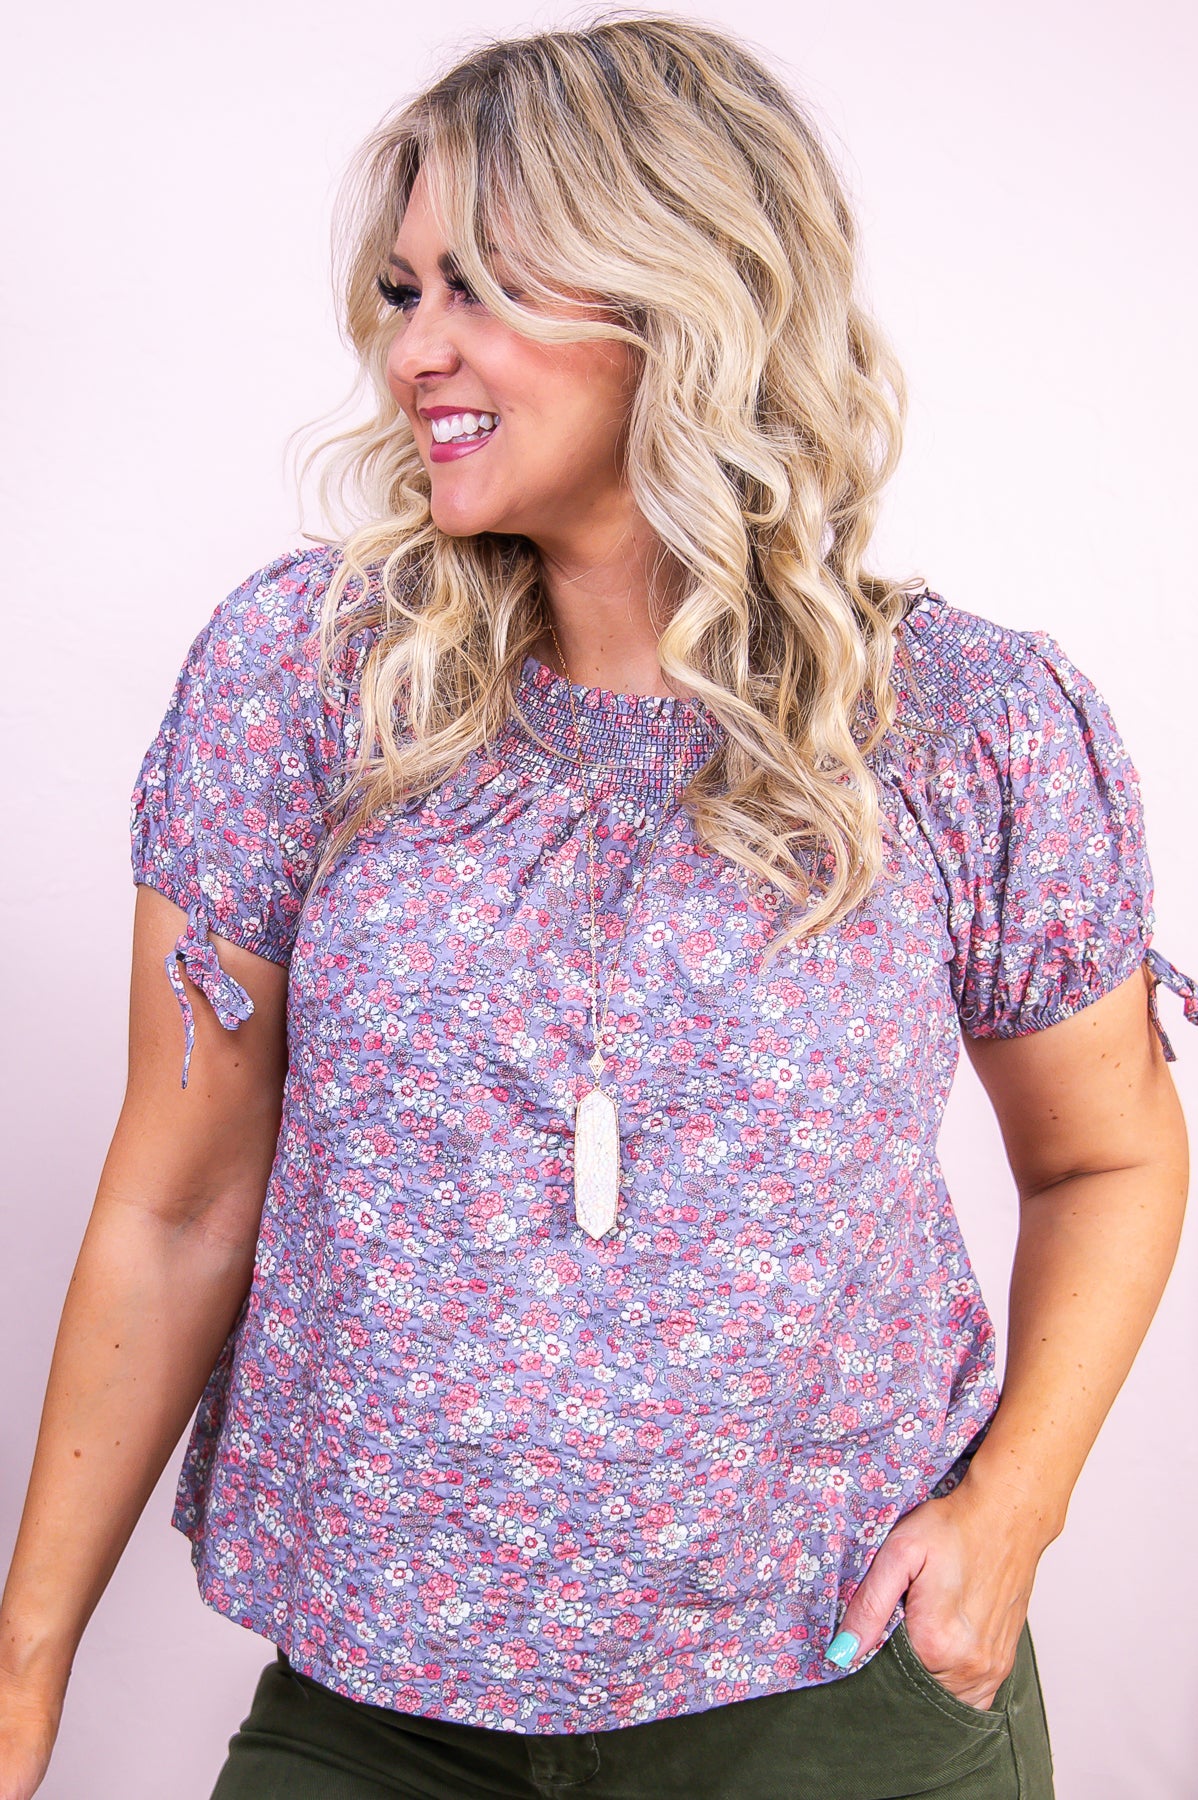 Shop The Look Dusty Lilac/Multi Color Floral Top - T9519DLI